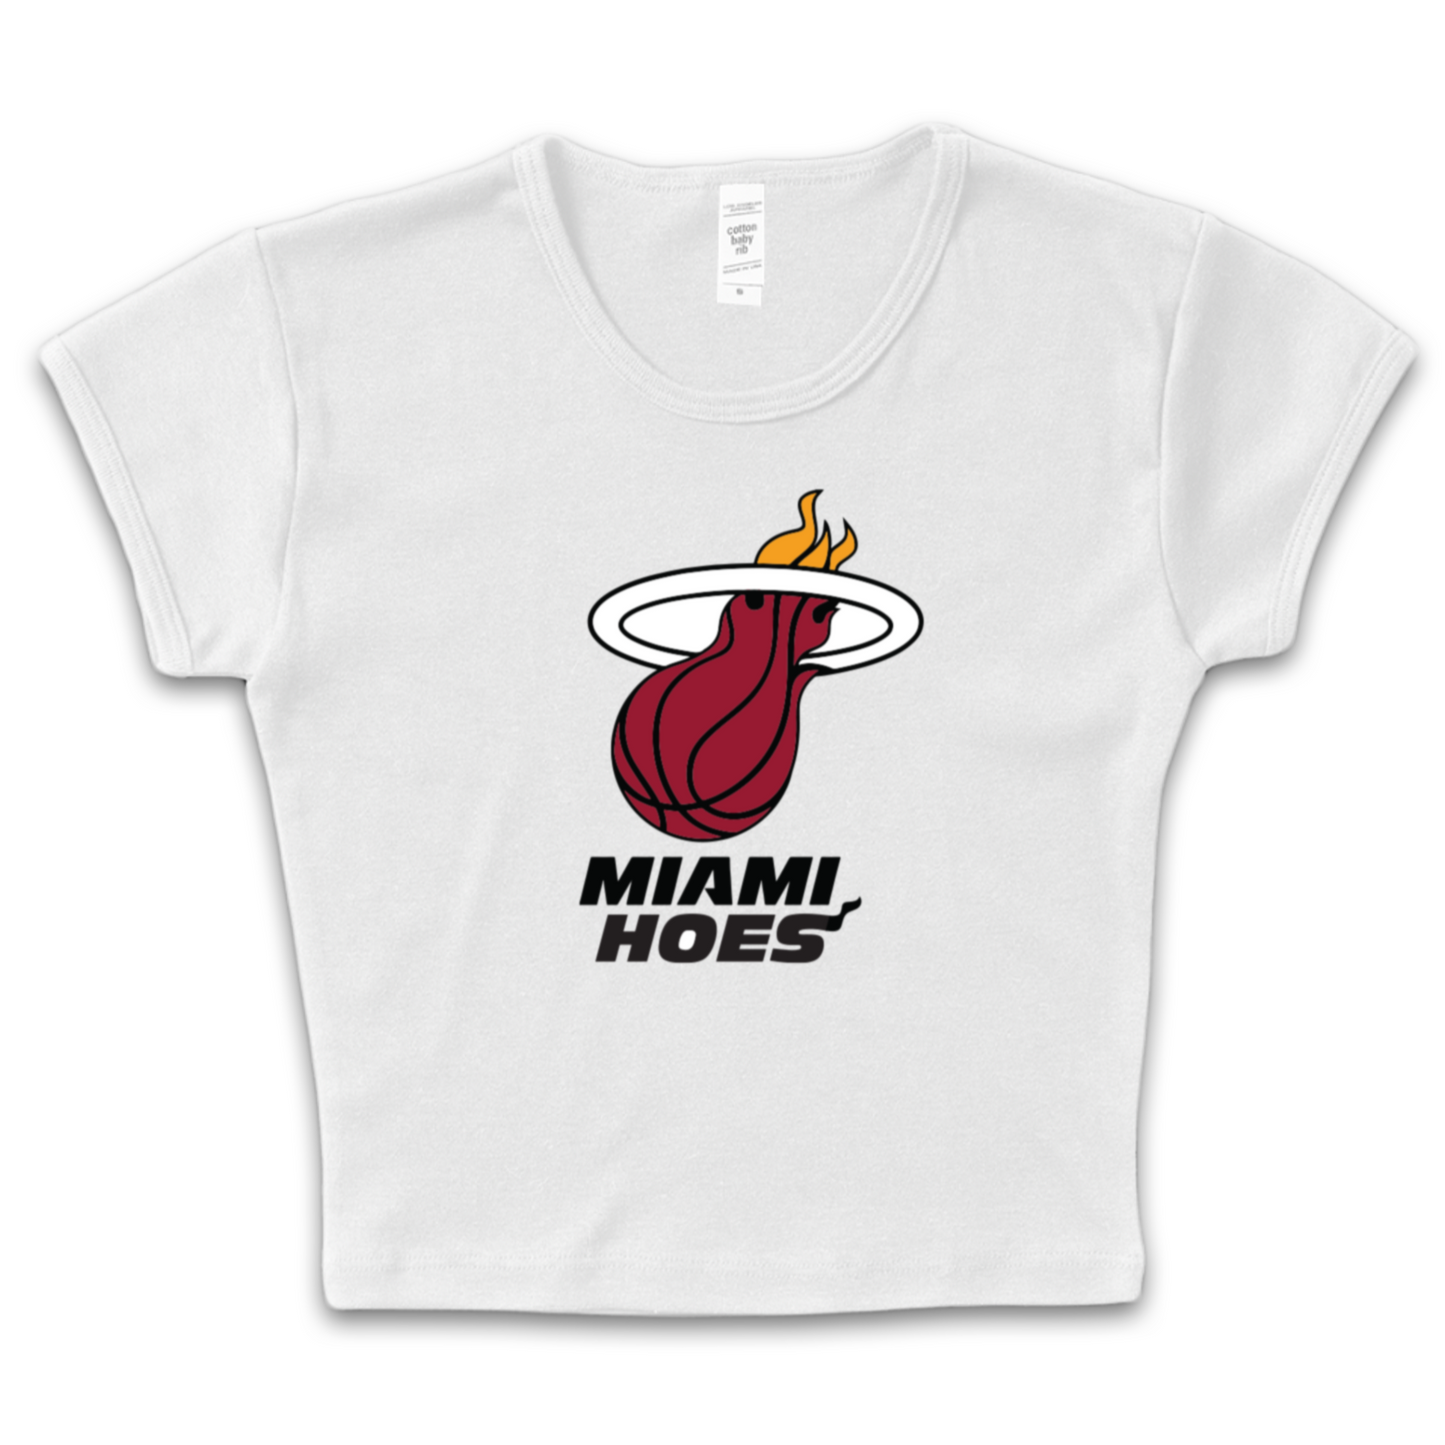 Miami Hoes Baby Tee